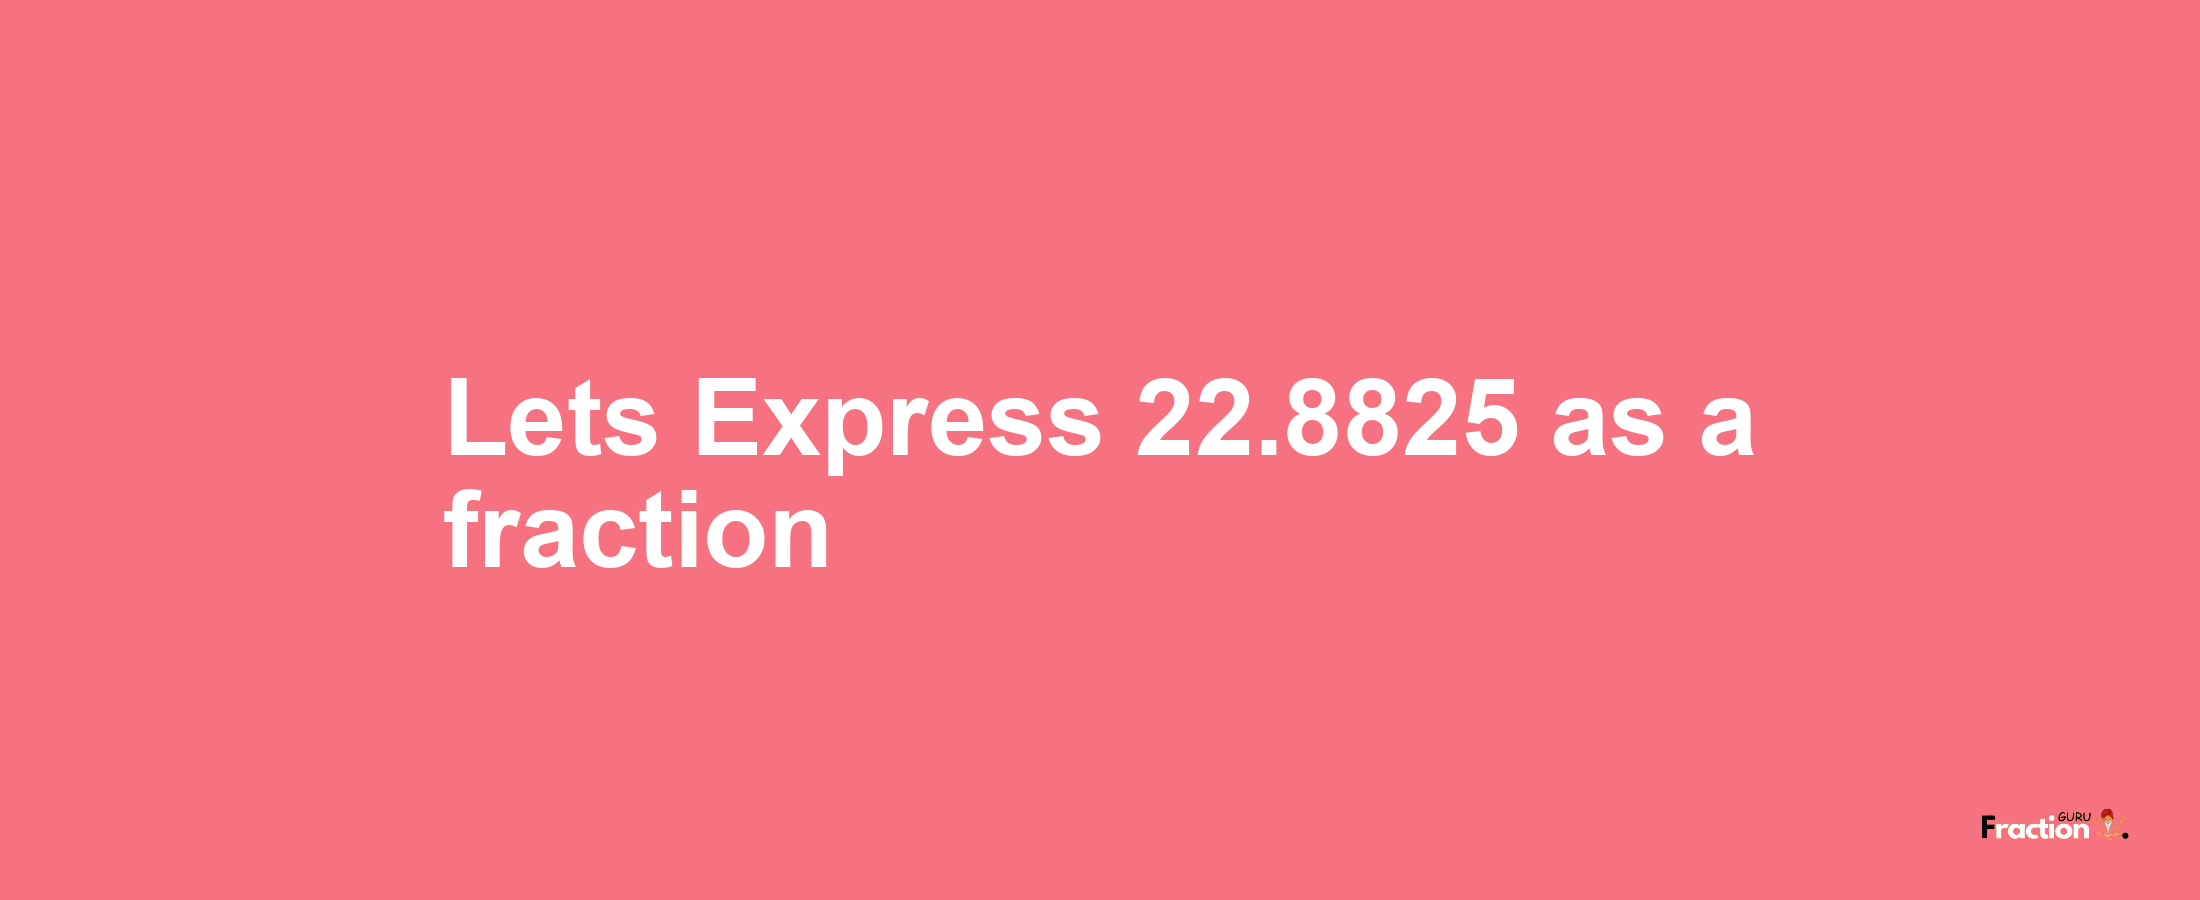 Lets Express 22.8825 as afraction